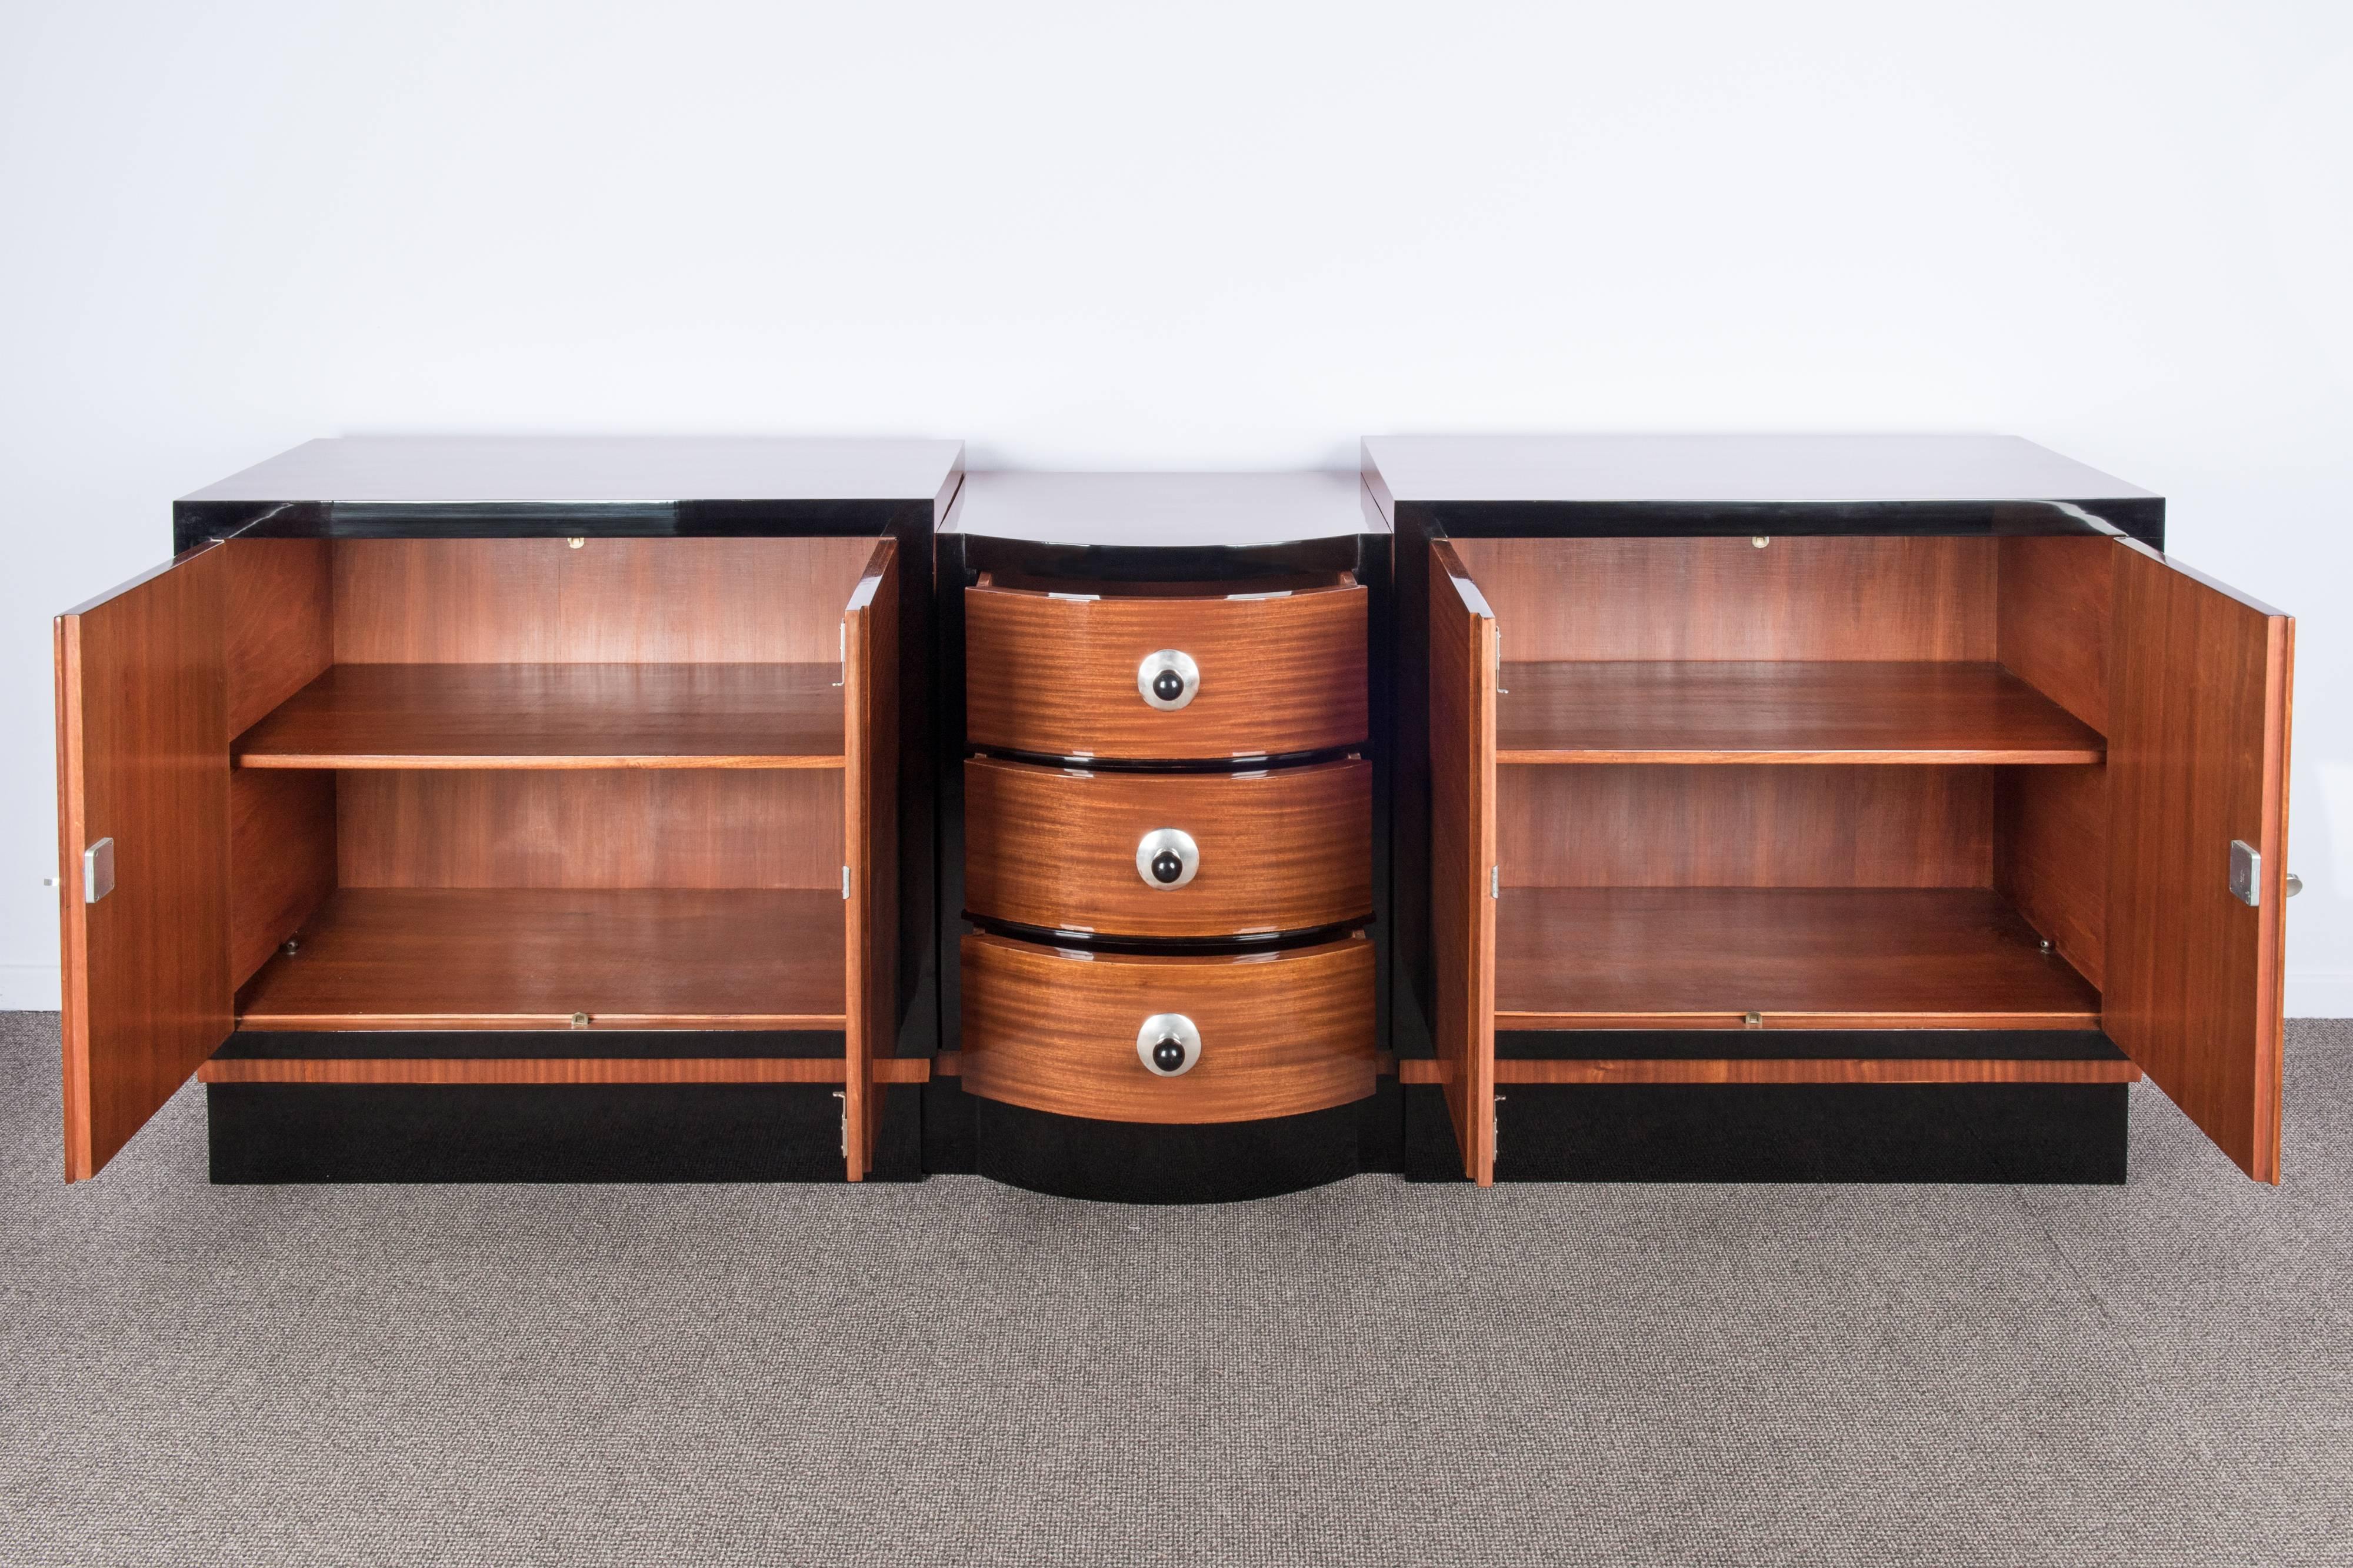 Spectacular mahogany veneered Art Deco sideboard. Two lateral cabinets with doors opening to a space with shelves, three large drawers in the middle.
The frame of the art-deco credenza is black laquered. Keys and hardwares are silver plated, the